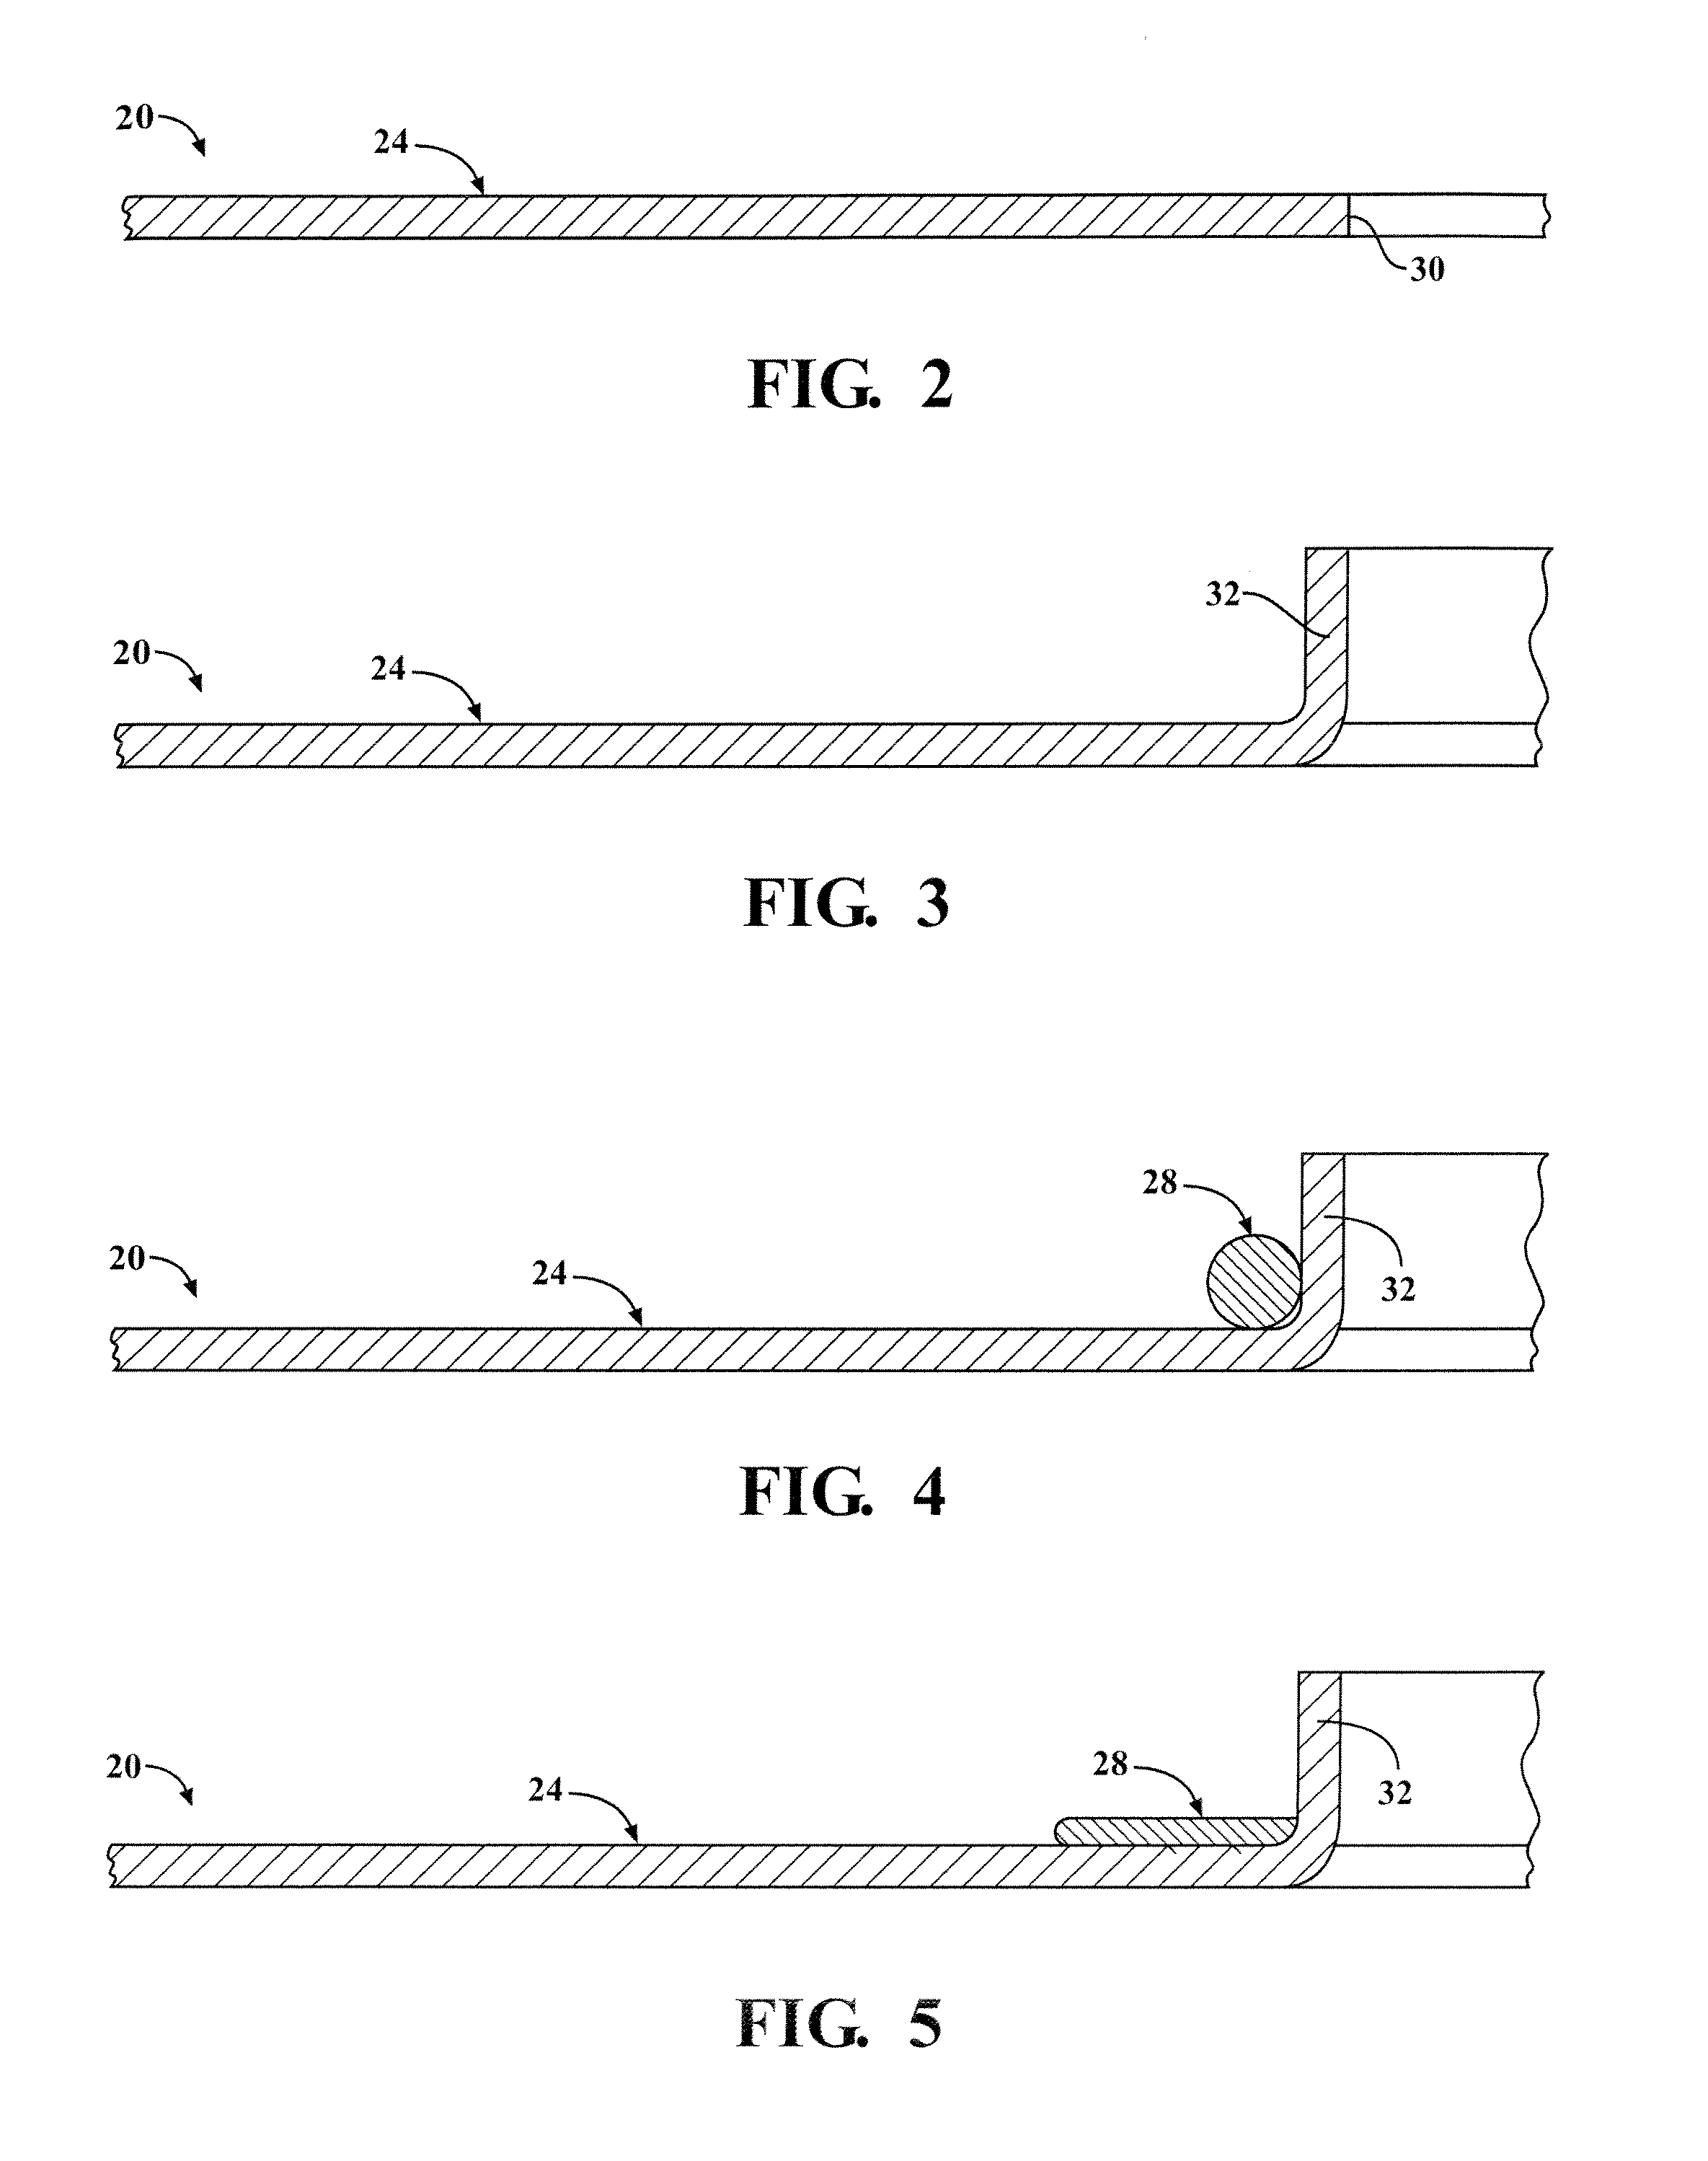 Static gasket with wire compression limiter